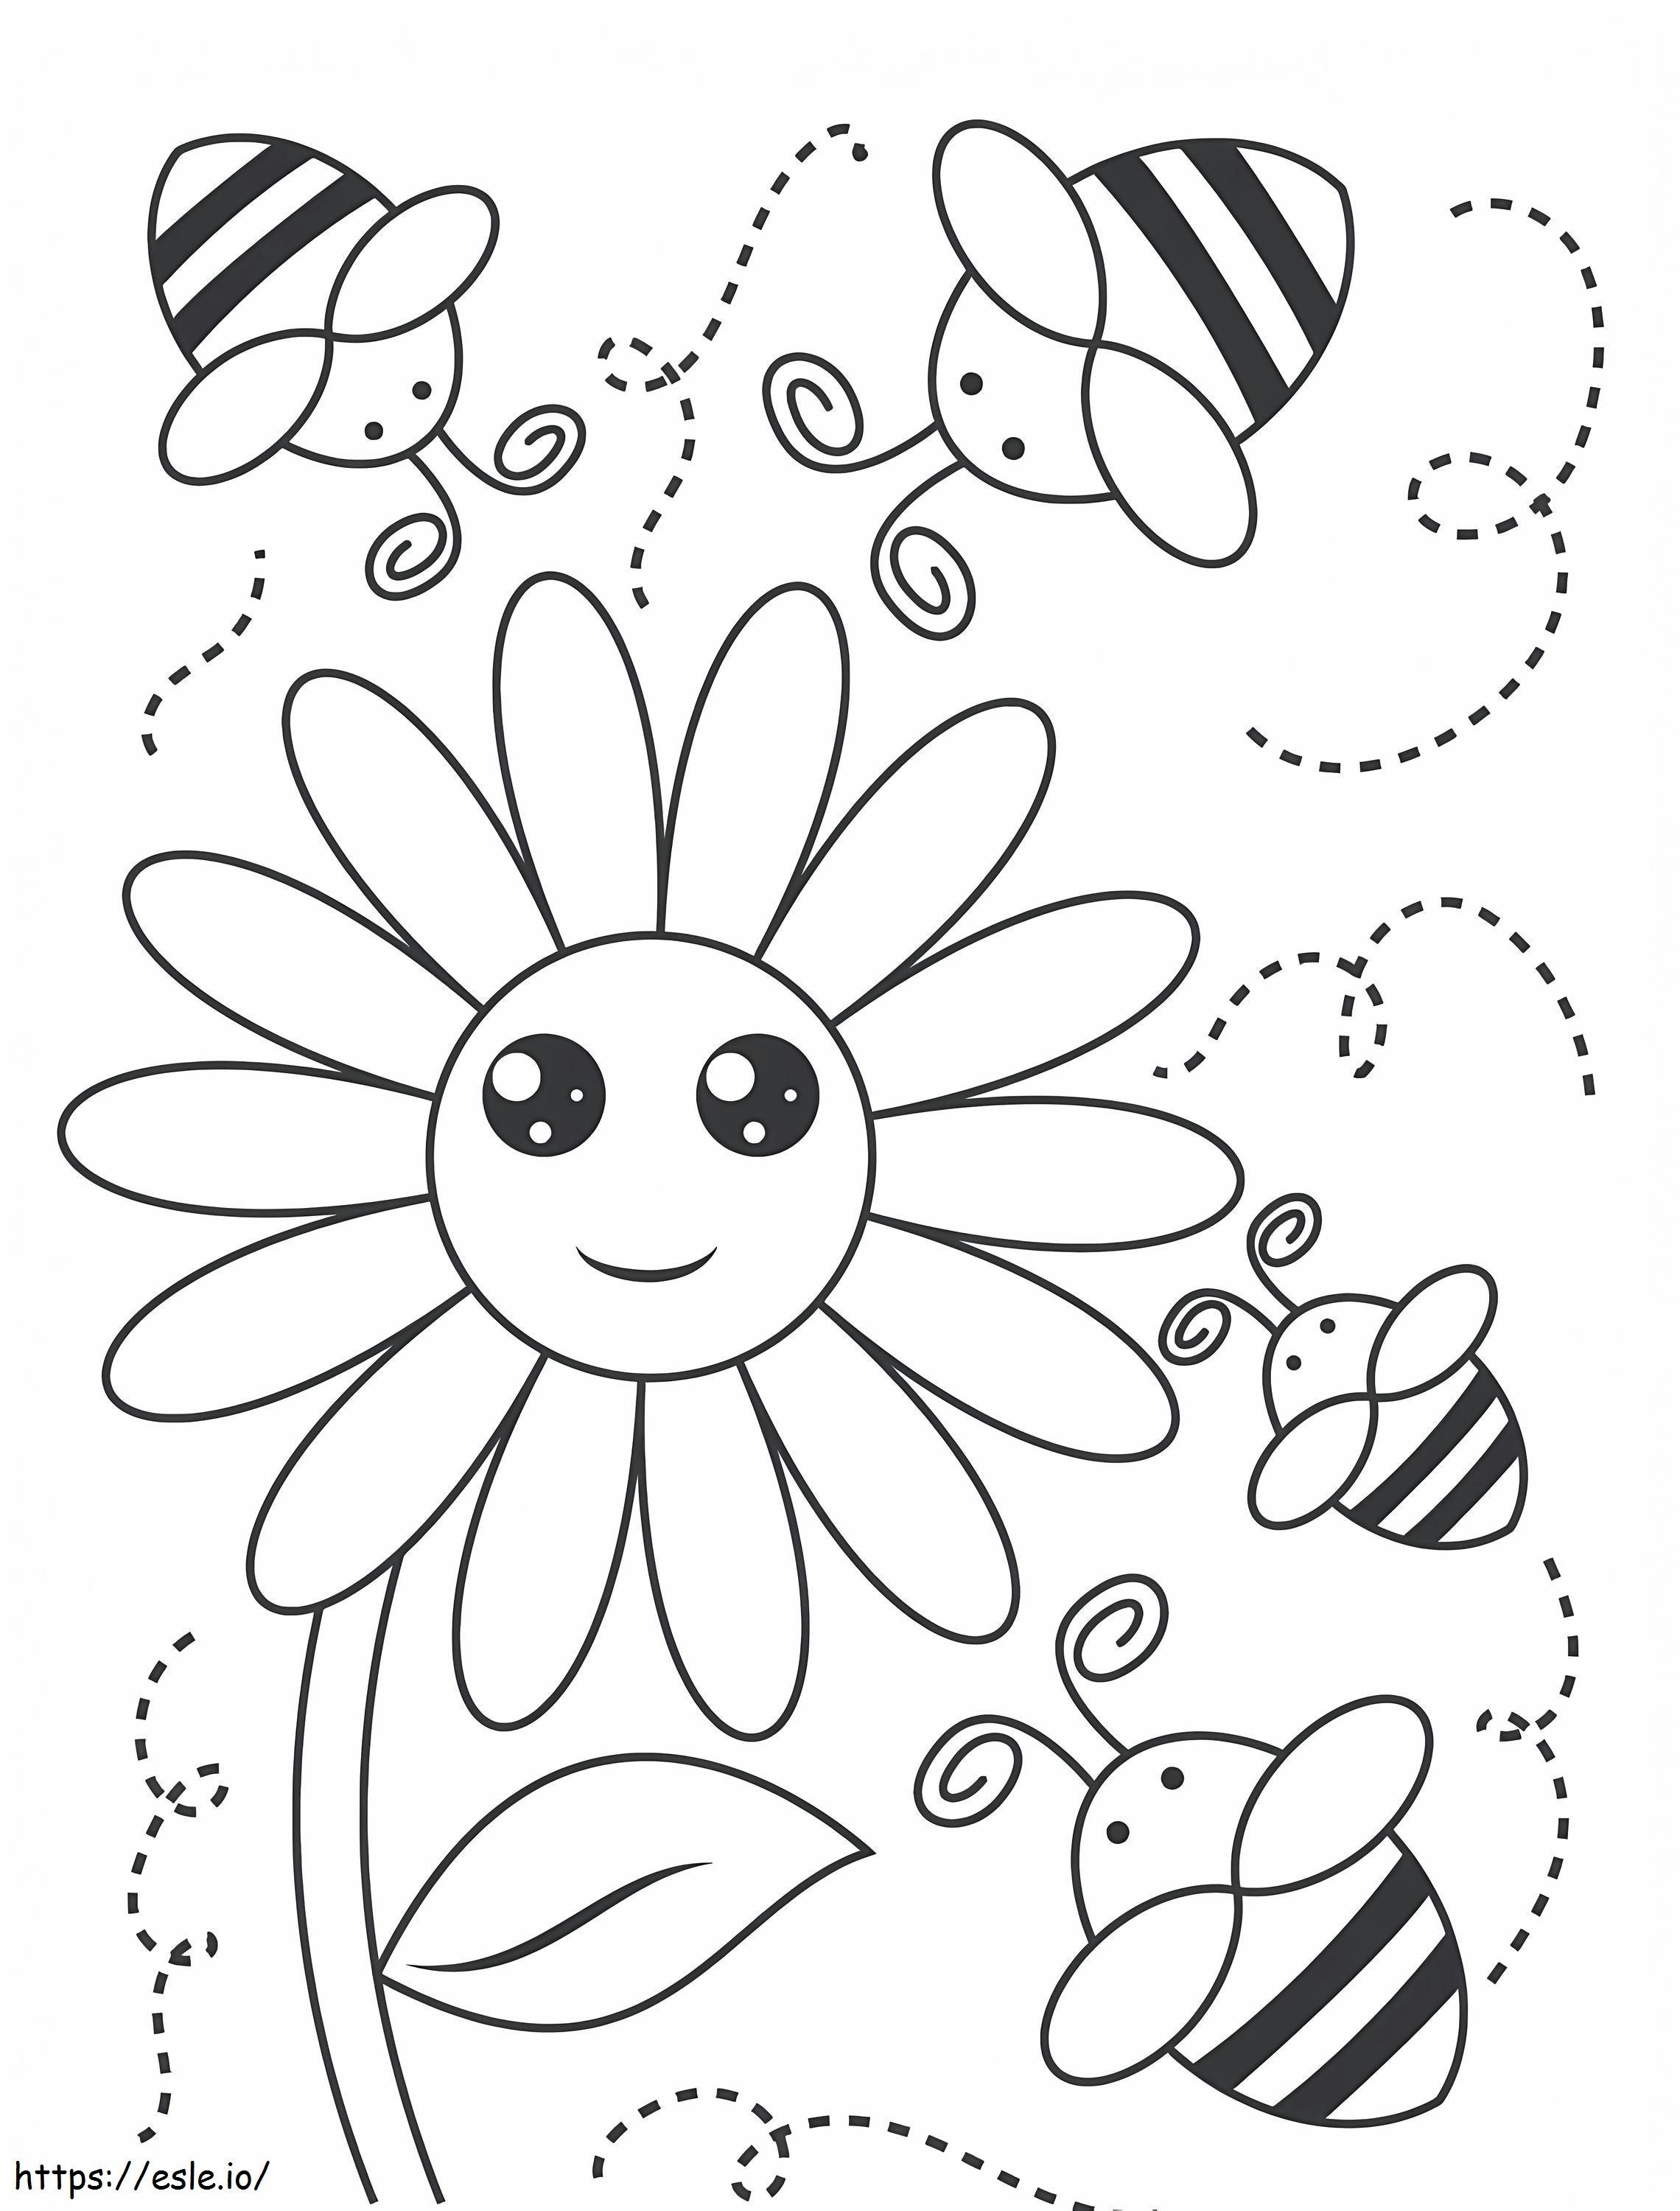 Four Smiling Bees With Flower coloring page